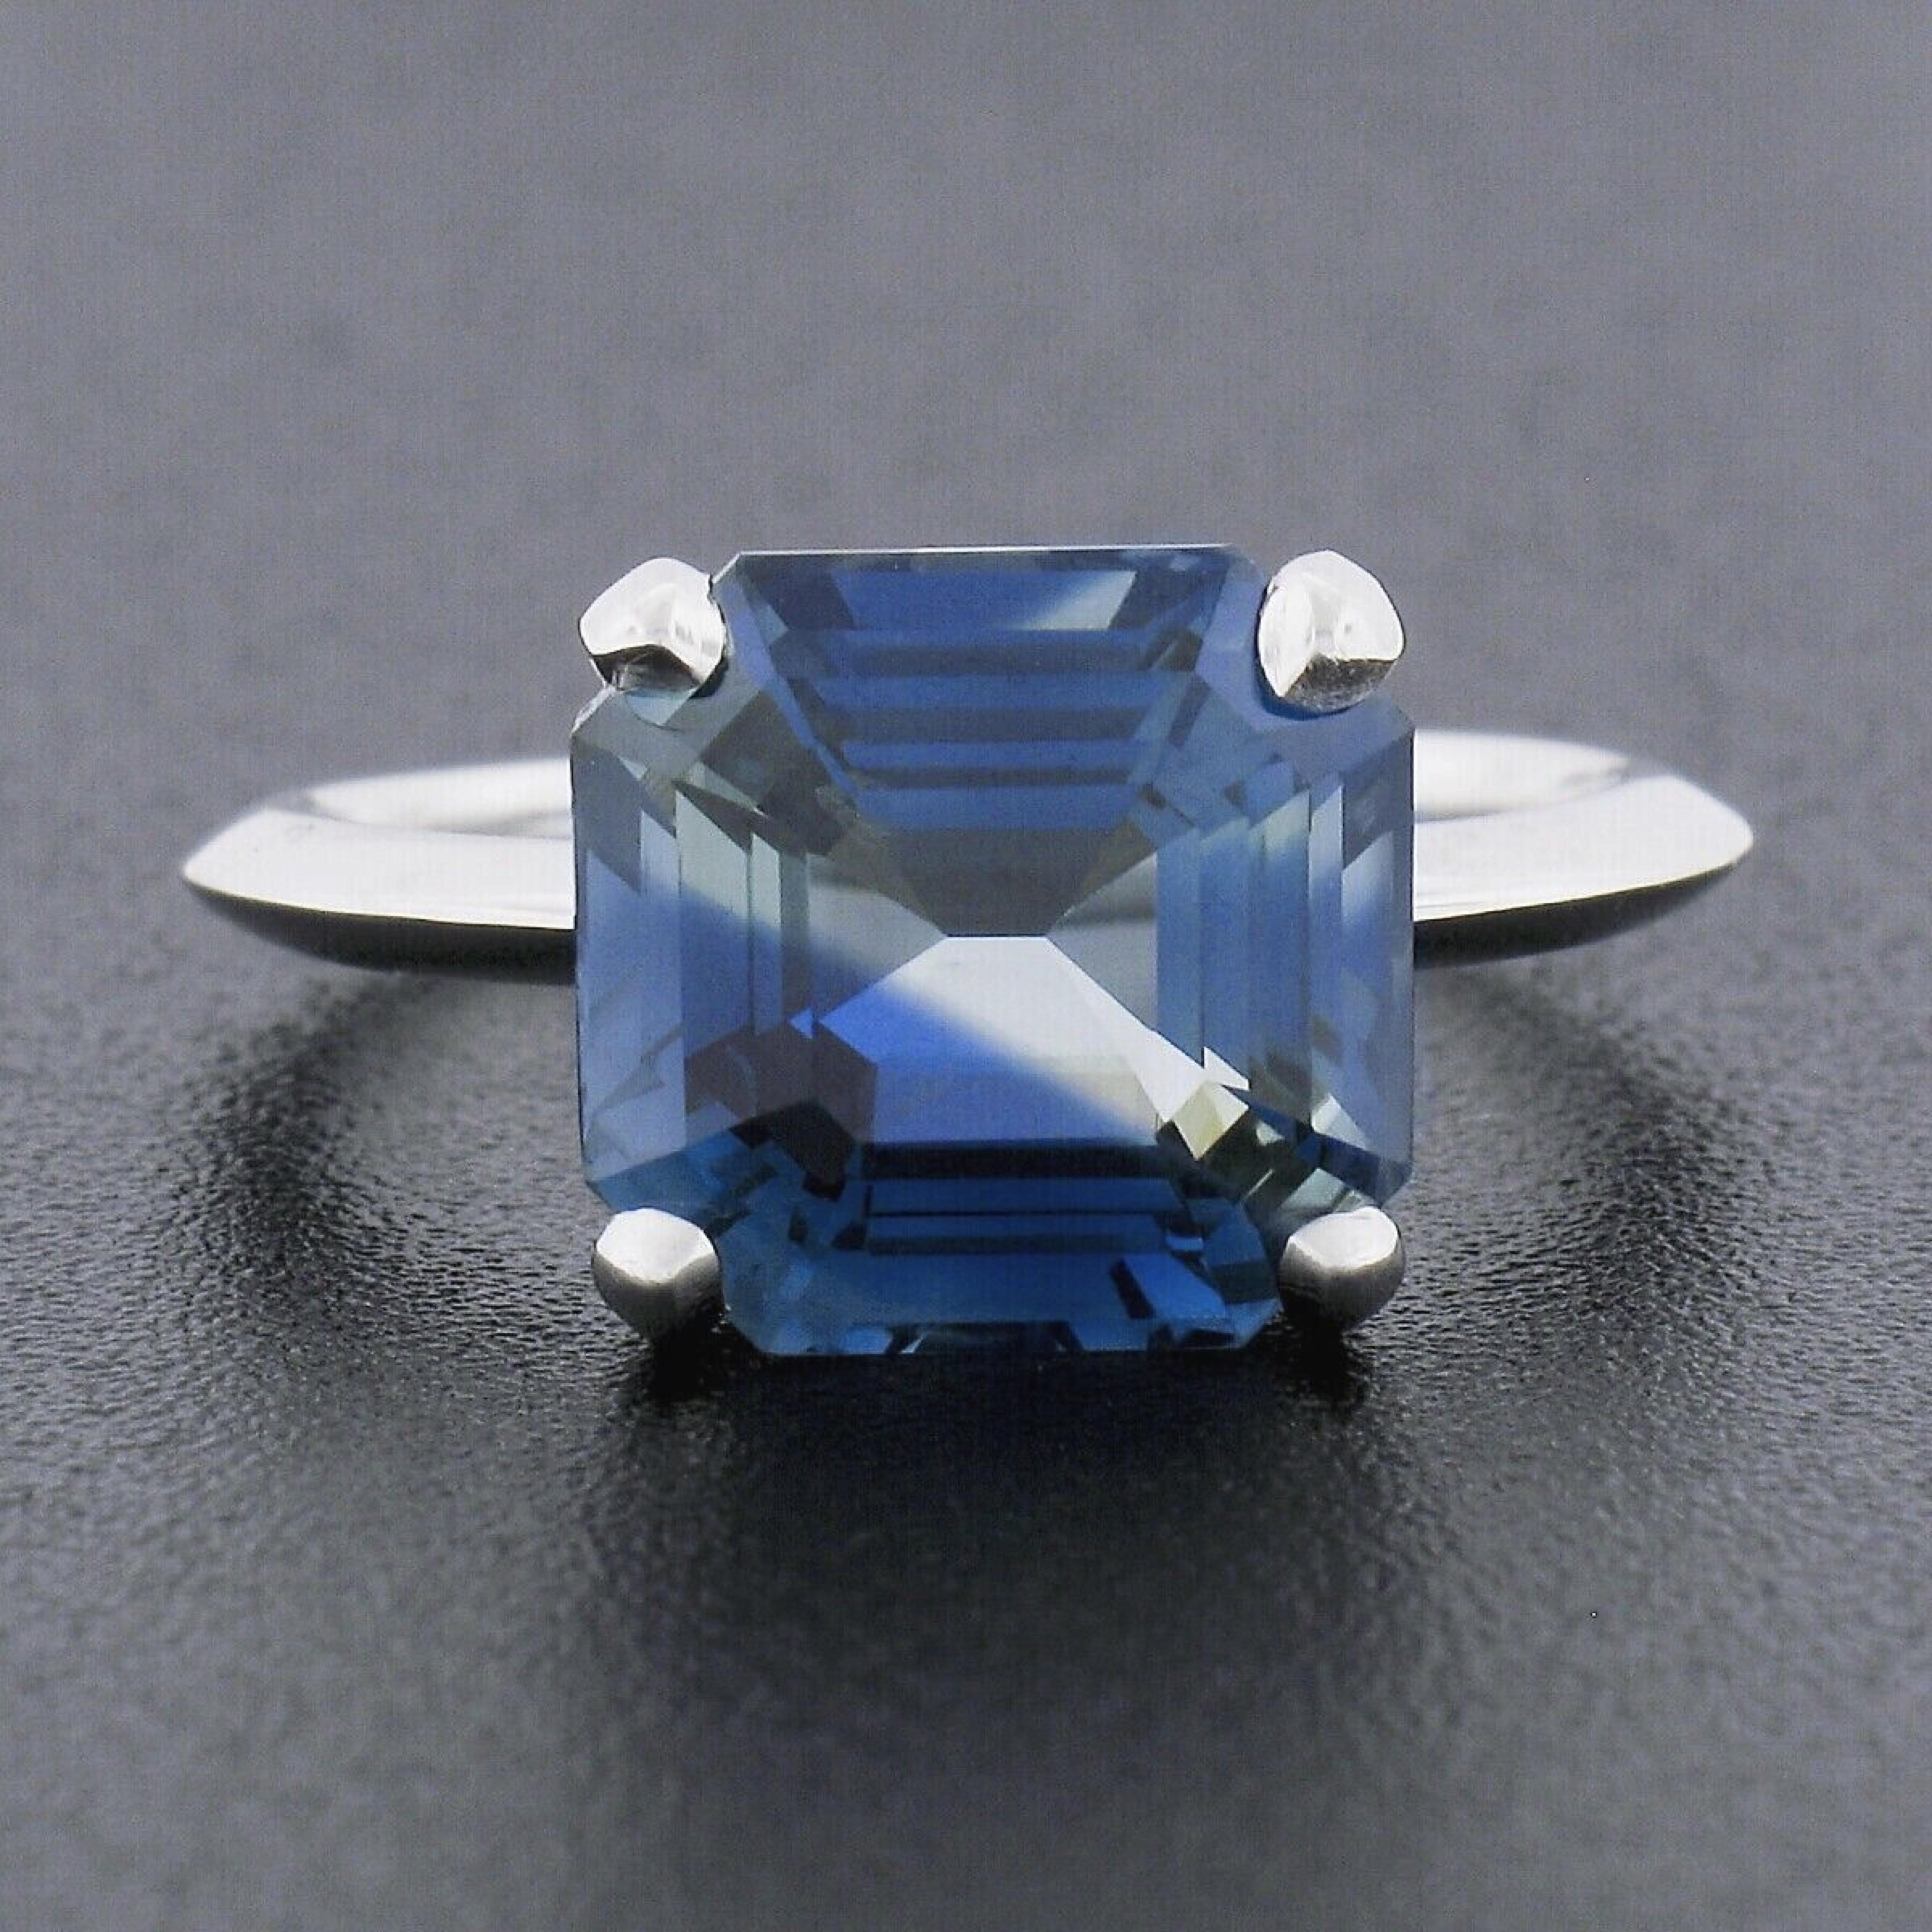 Here we have a truly magnificent sapphire solitaire ring newly crafted from solid platinum. The ring features an incredibly unique, 100% natural, GIA certified sapphire that has the most amazing naturally zoned greenish-blue color with no heat